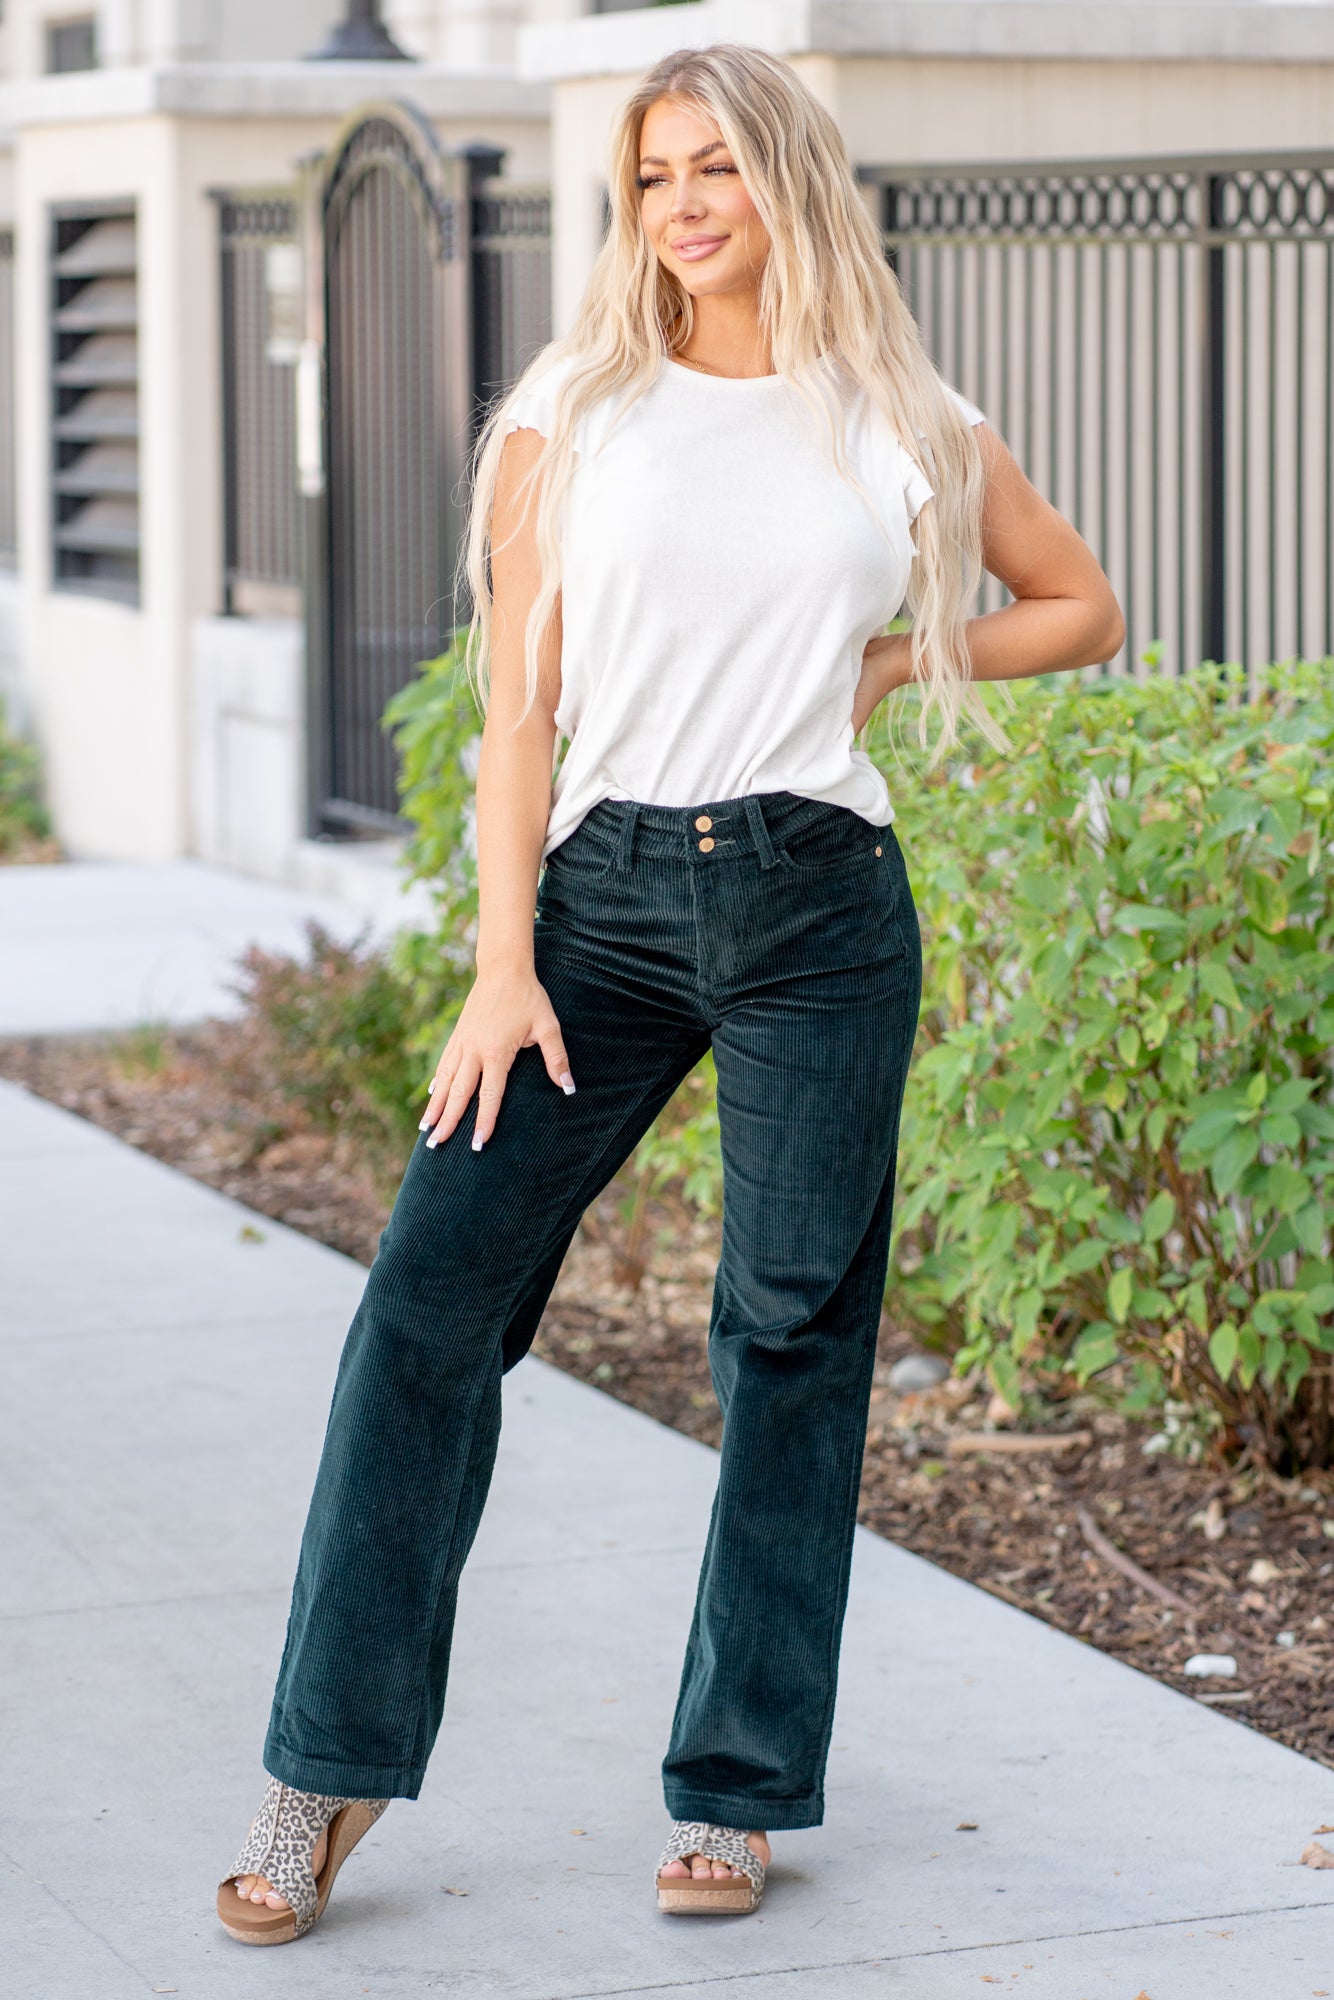 Rolla's Jeans - @best.dressed wearing our Ivy Cord Flare